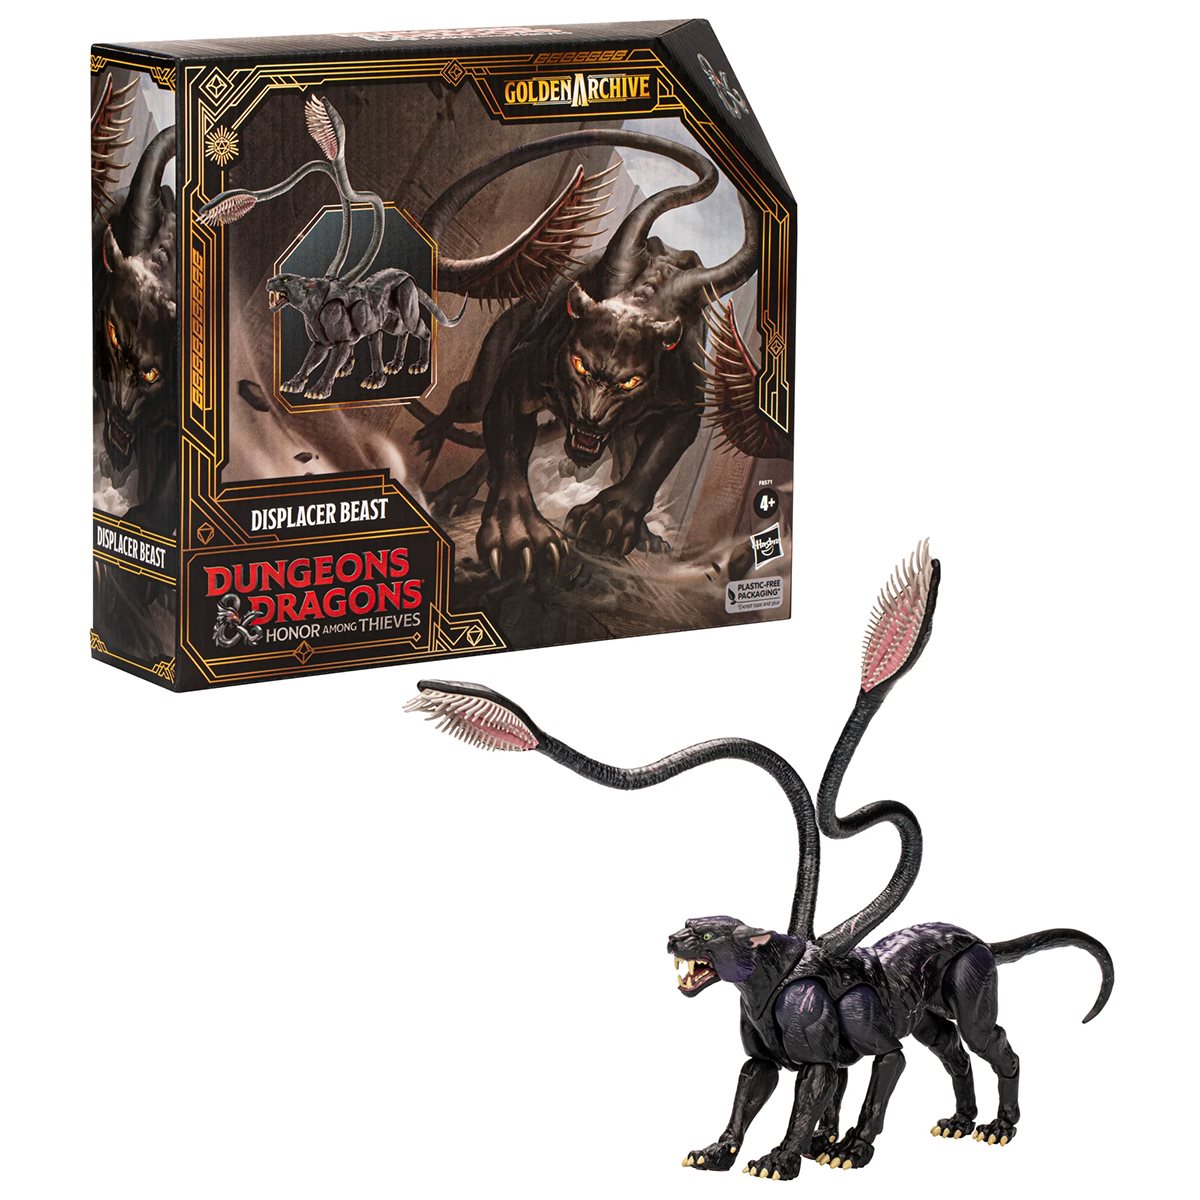 Dungeons & Dragons Golden Archive Displacer Beast 6-inch Scale Action Figure